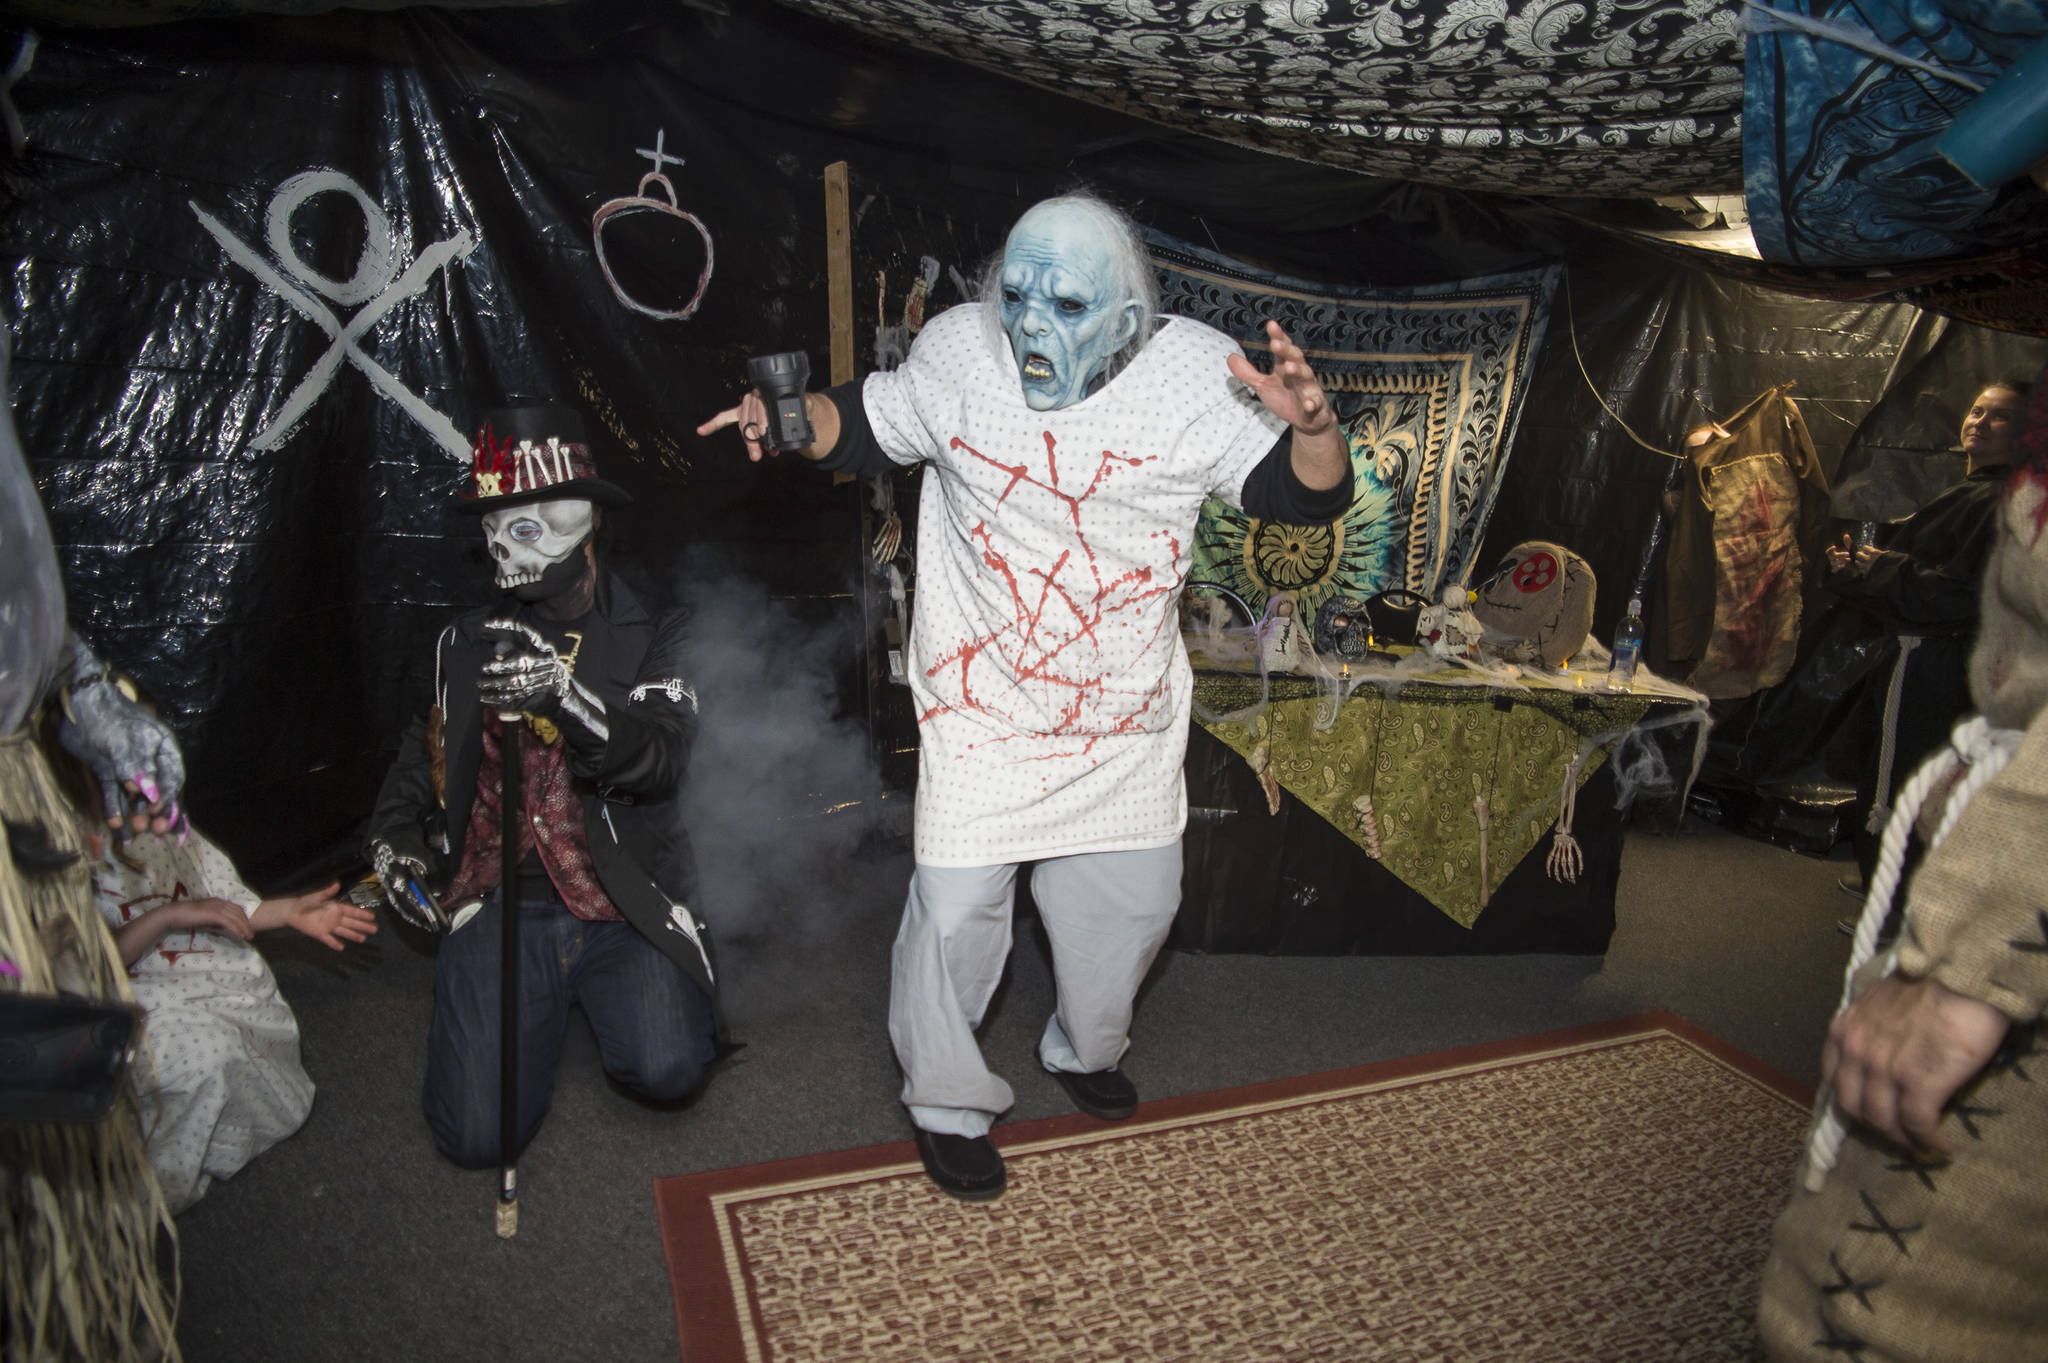 Juneau residents react to scares and chills as they make their way through the Haunted Station at the U.S. Coast Guard’s Station Juneau on Friday, Oct. 26, 2018. Station personnel pay for all the decoration themselves and take three weeks to ready the station. Entry is non perishable food items for the Southeast Alaska Food Bank. (Michael Penn | Juneau Empire)